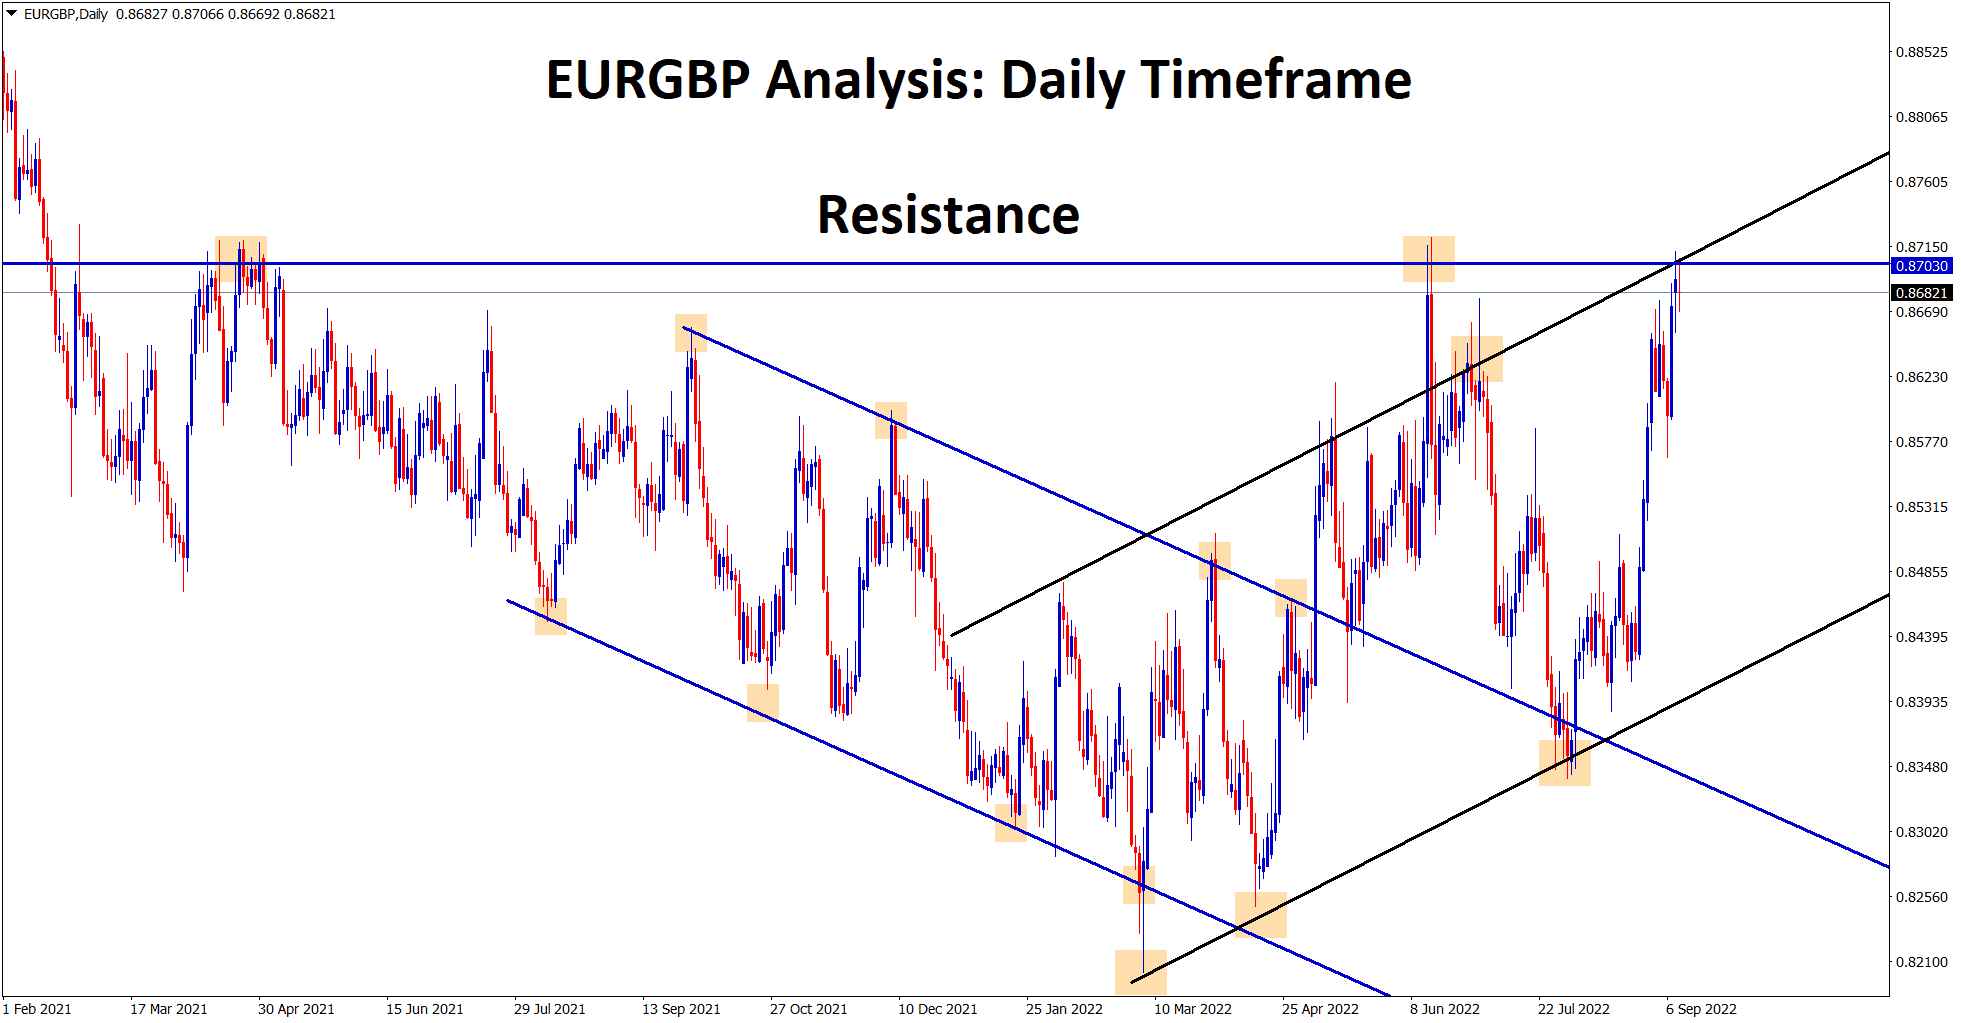 EURGBP price at the resistance